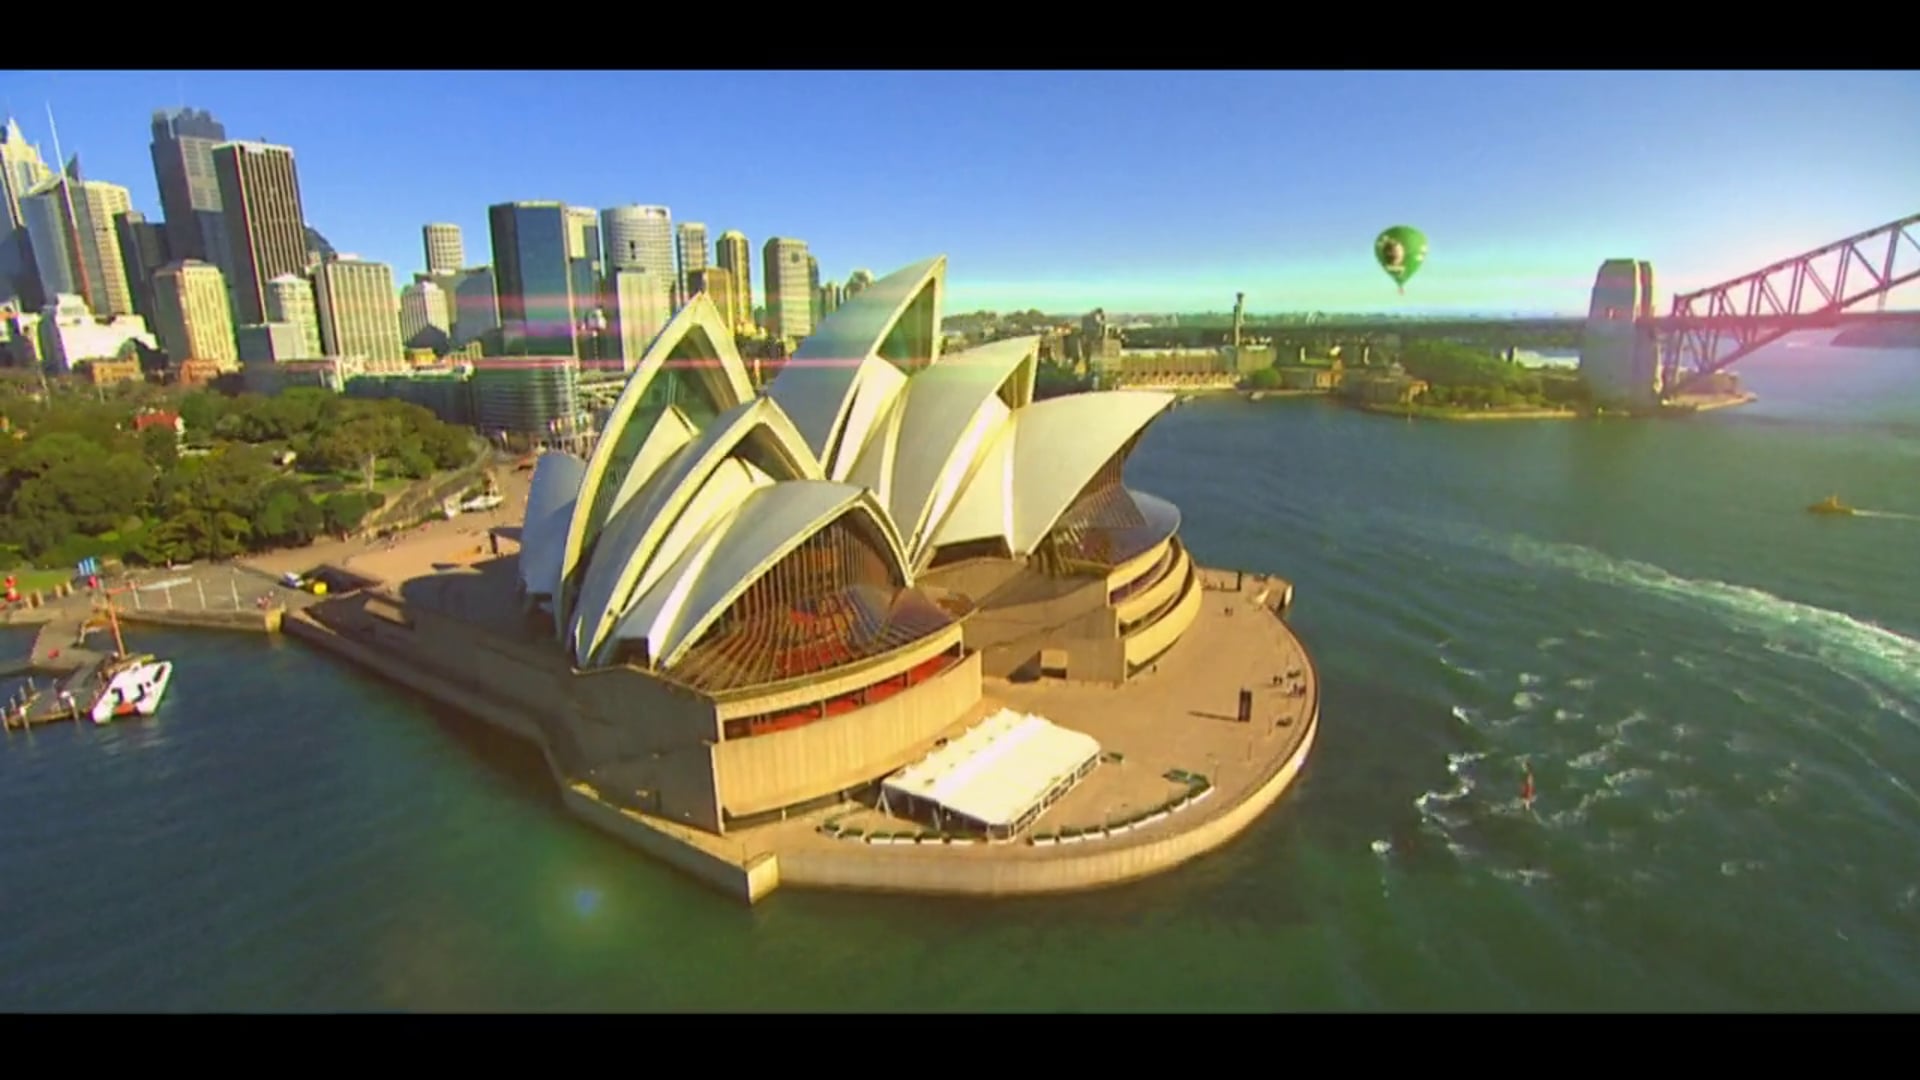 WICKED "Sydney Arrival"